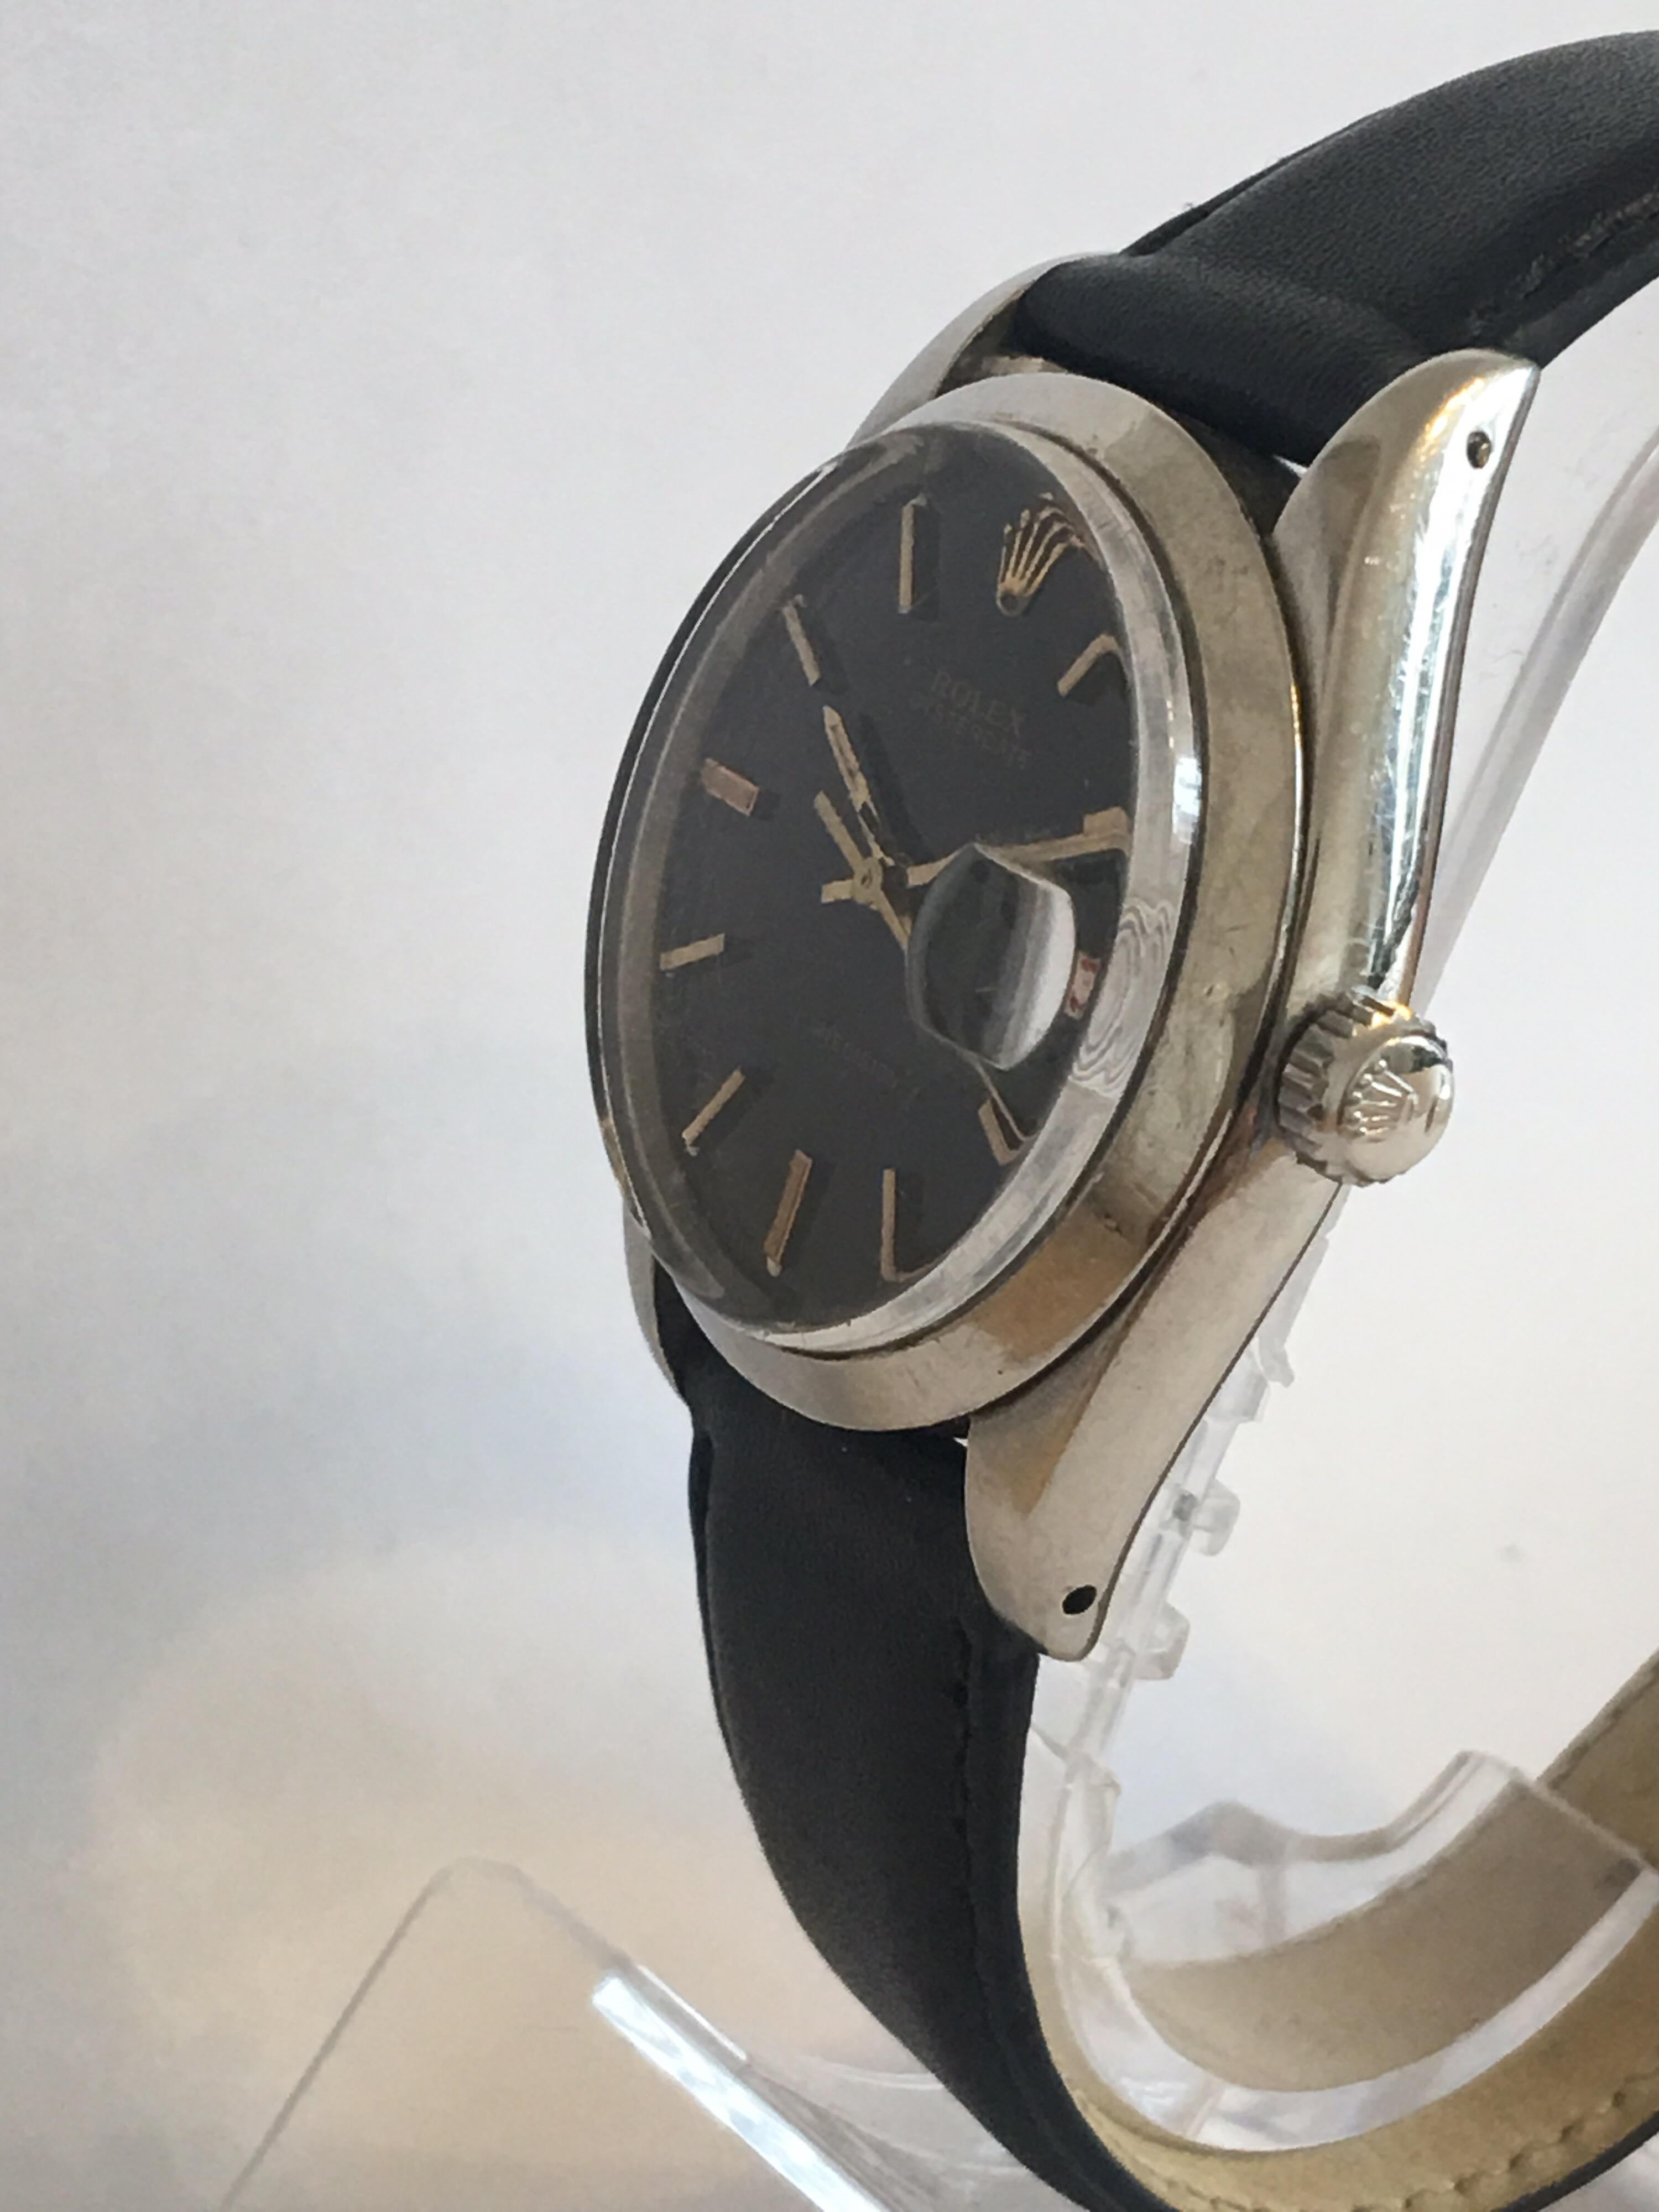 This Classic & Elegant Manual Watch is in Good Working condition and is ticking well with its swift second. Visible tiny scratches on the glass as shown on the images.

Please study the images carefully as form part of the description.